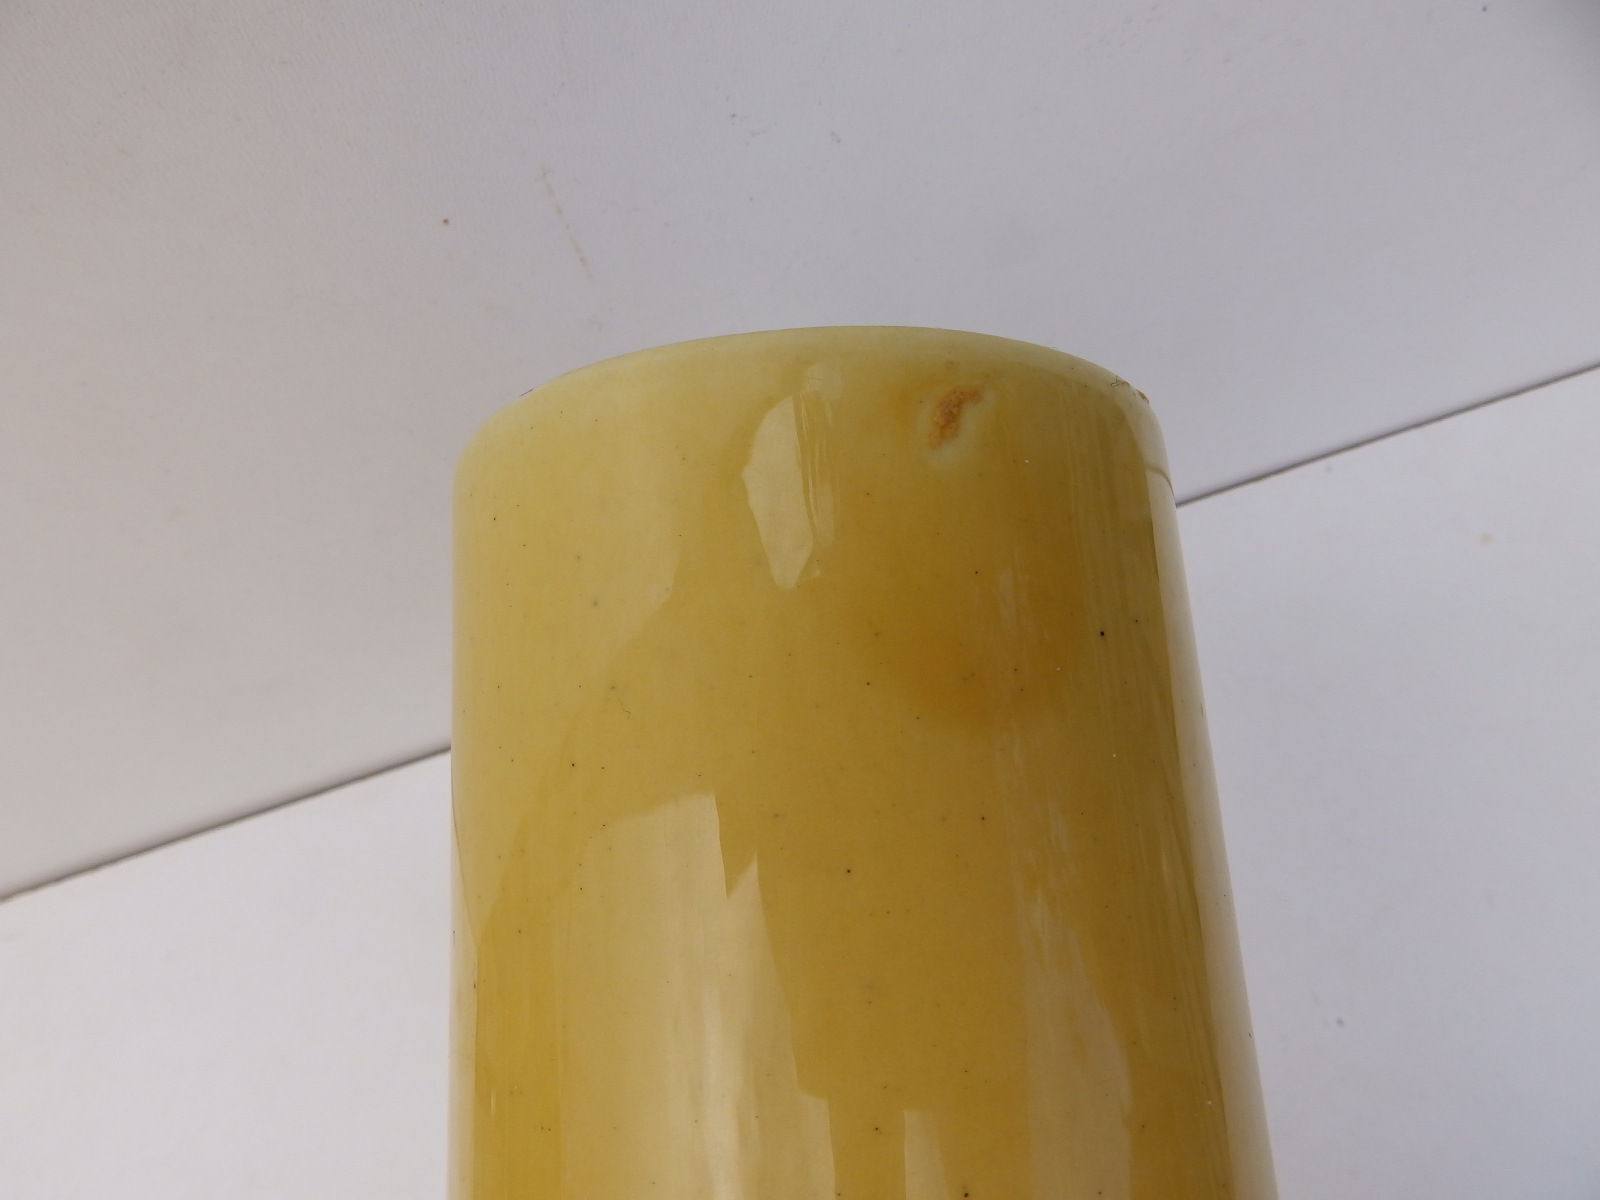 An 18thC Chinese Imperial yellow glazed porcelain bottle vase, 15.5" high - base drilled for use - Image 7 of 12